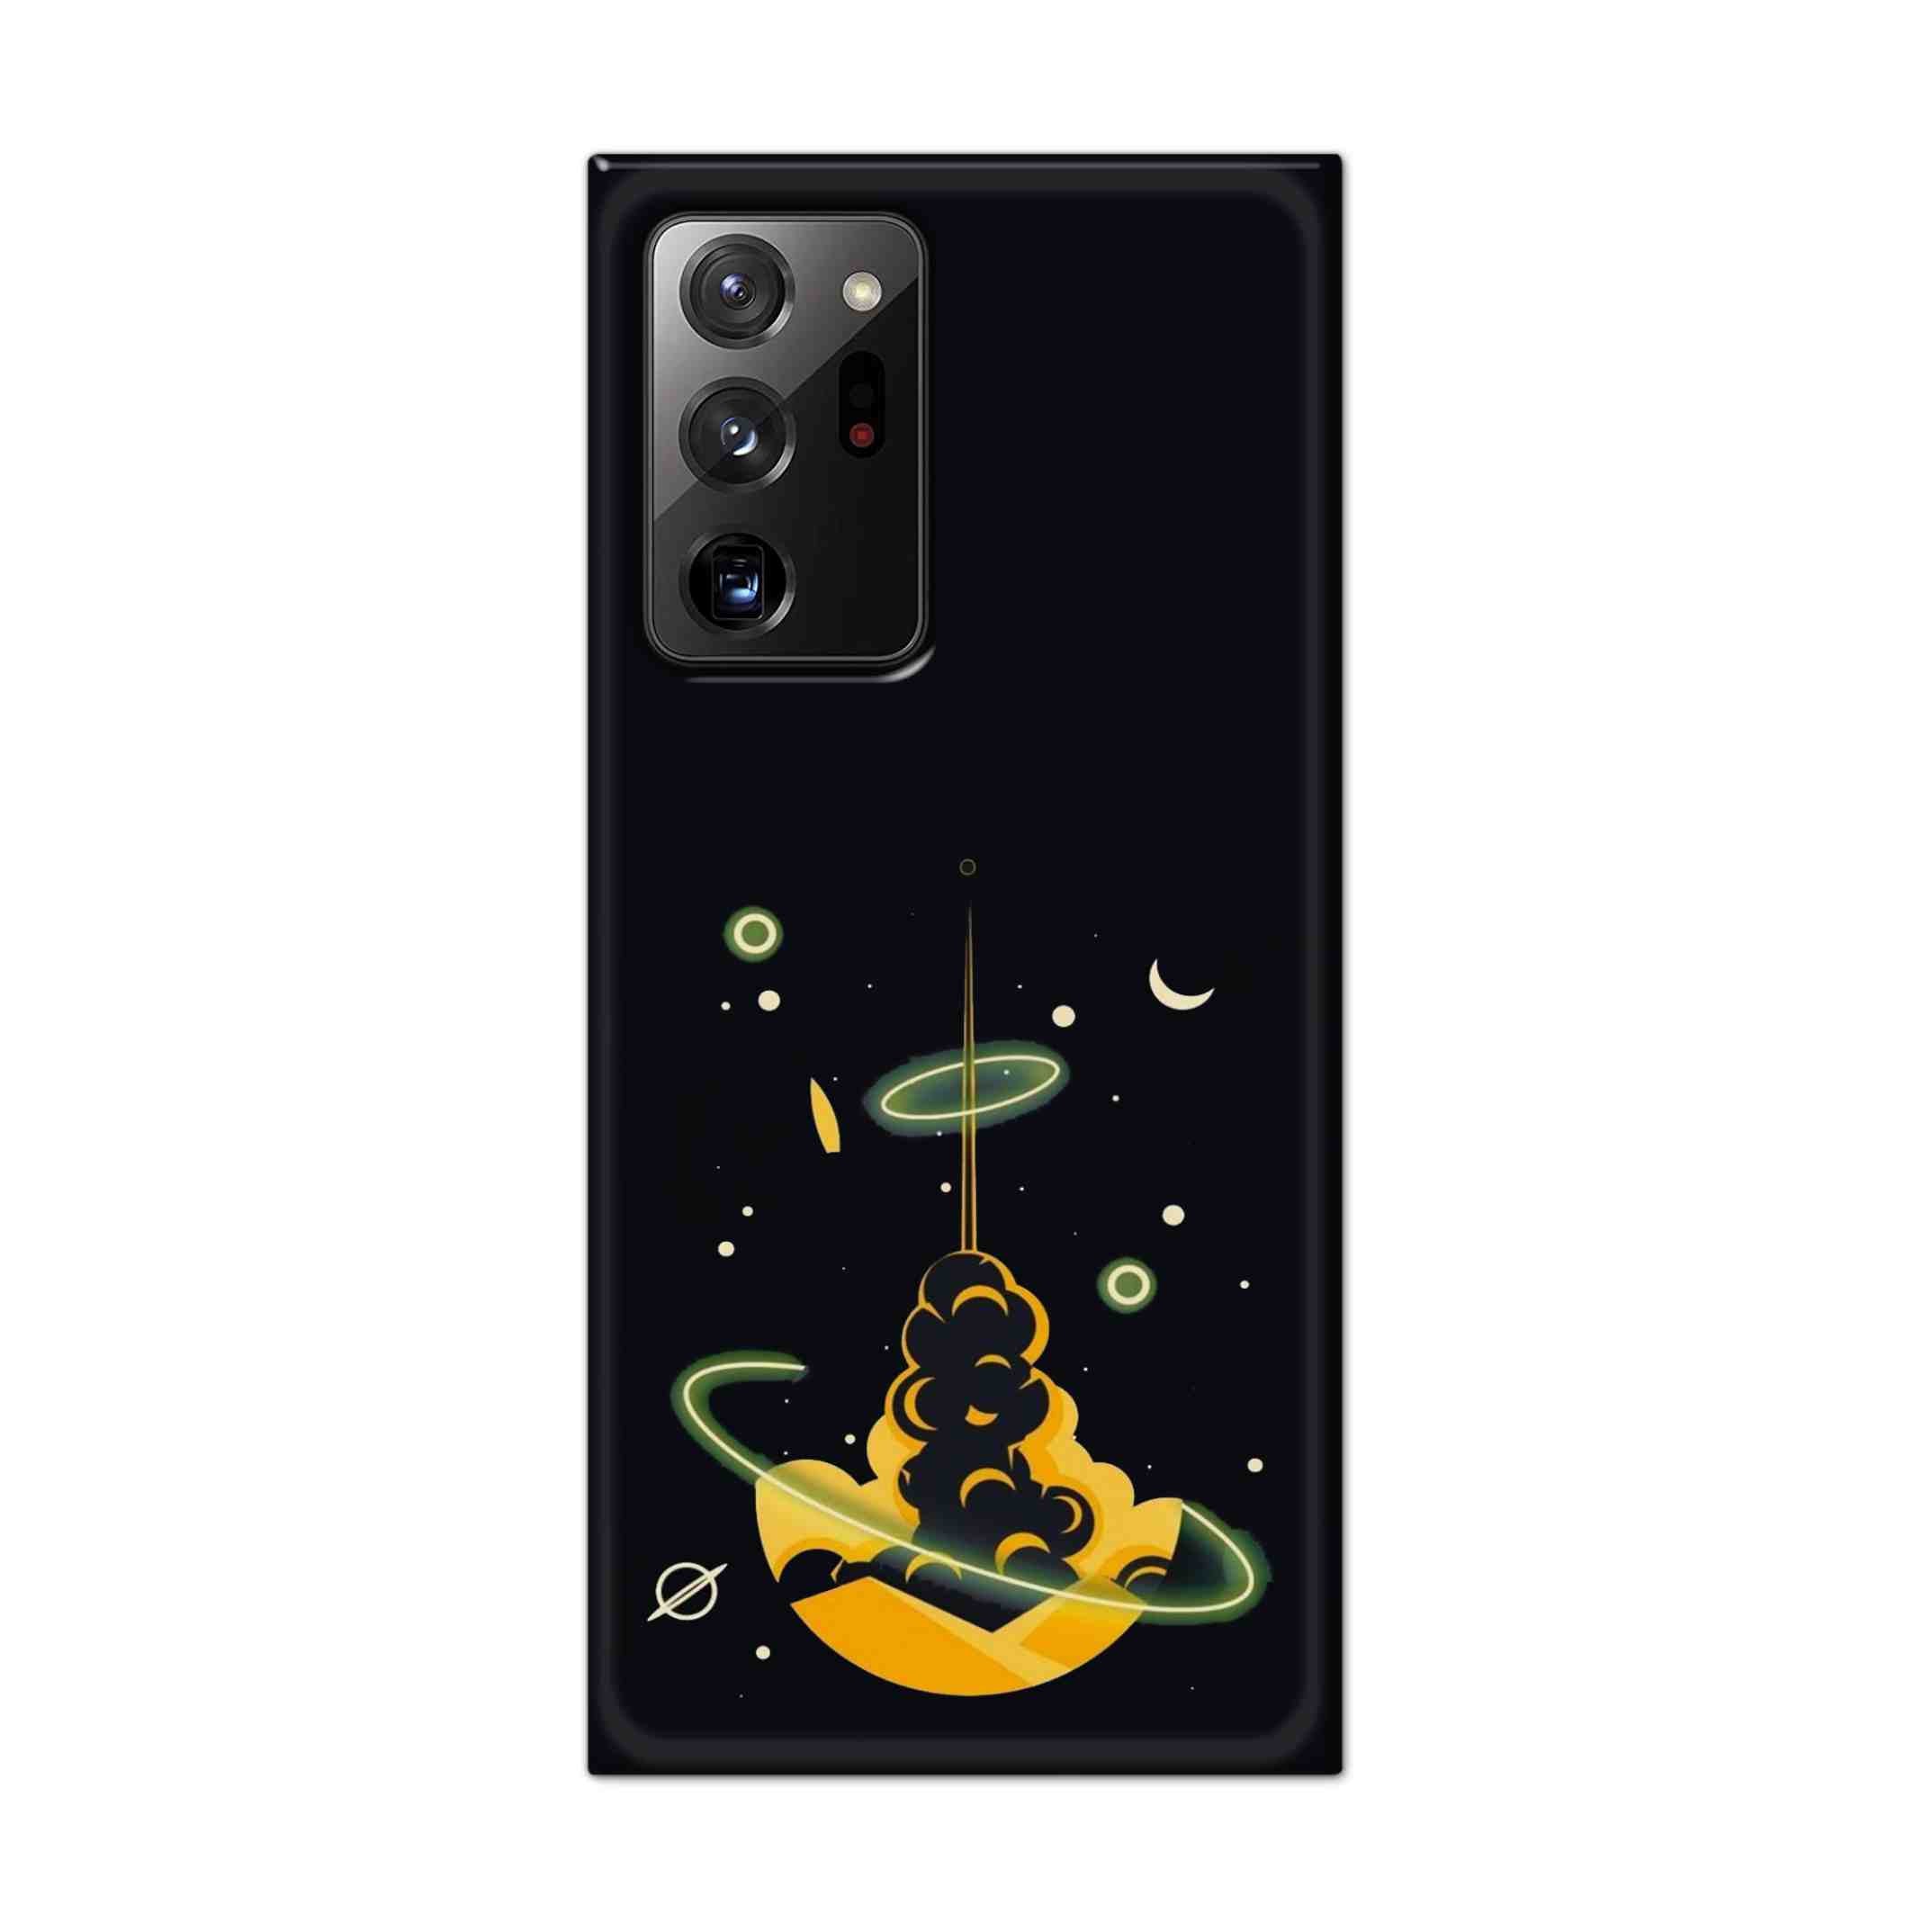 Buy Moon Hard Back Mobile Phone Case Cover For Samsung Galaxy Note 20 Ultra Online